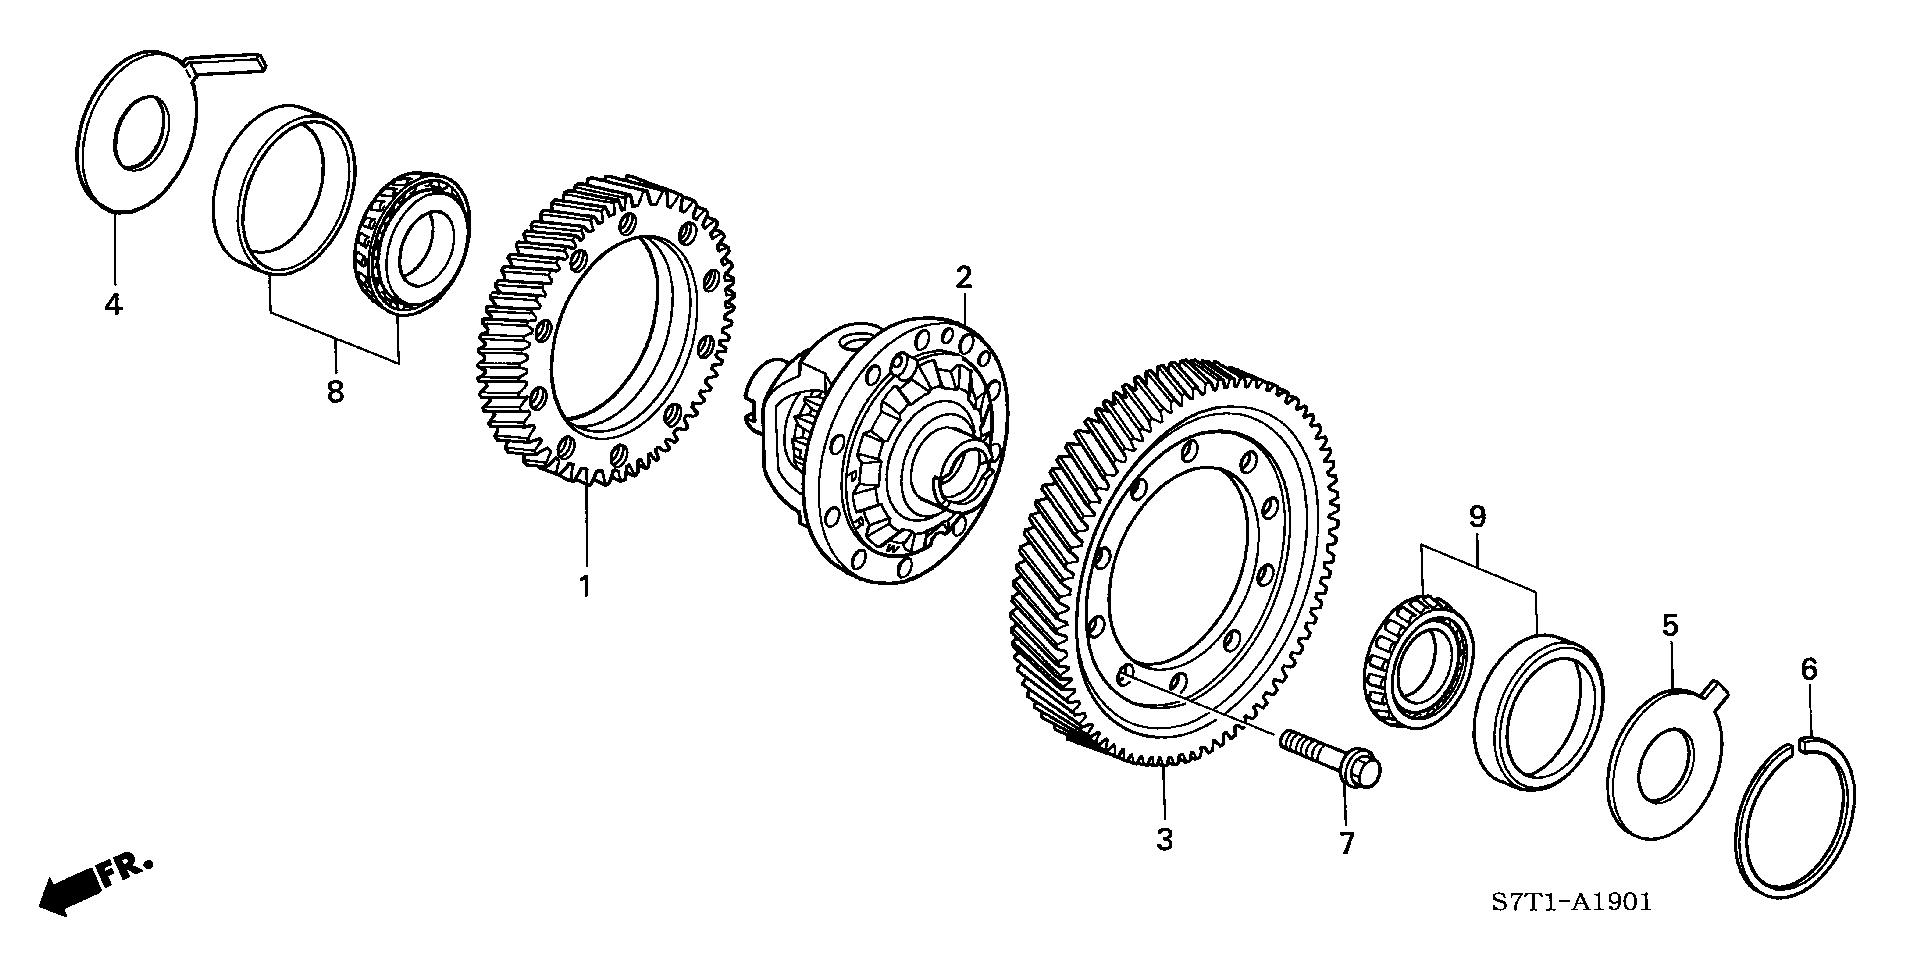 DIFFERENTIAL(4WD) (5AT)